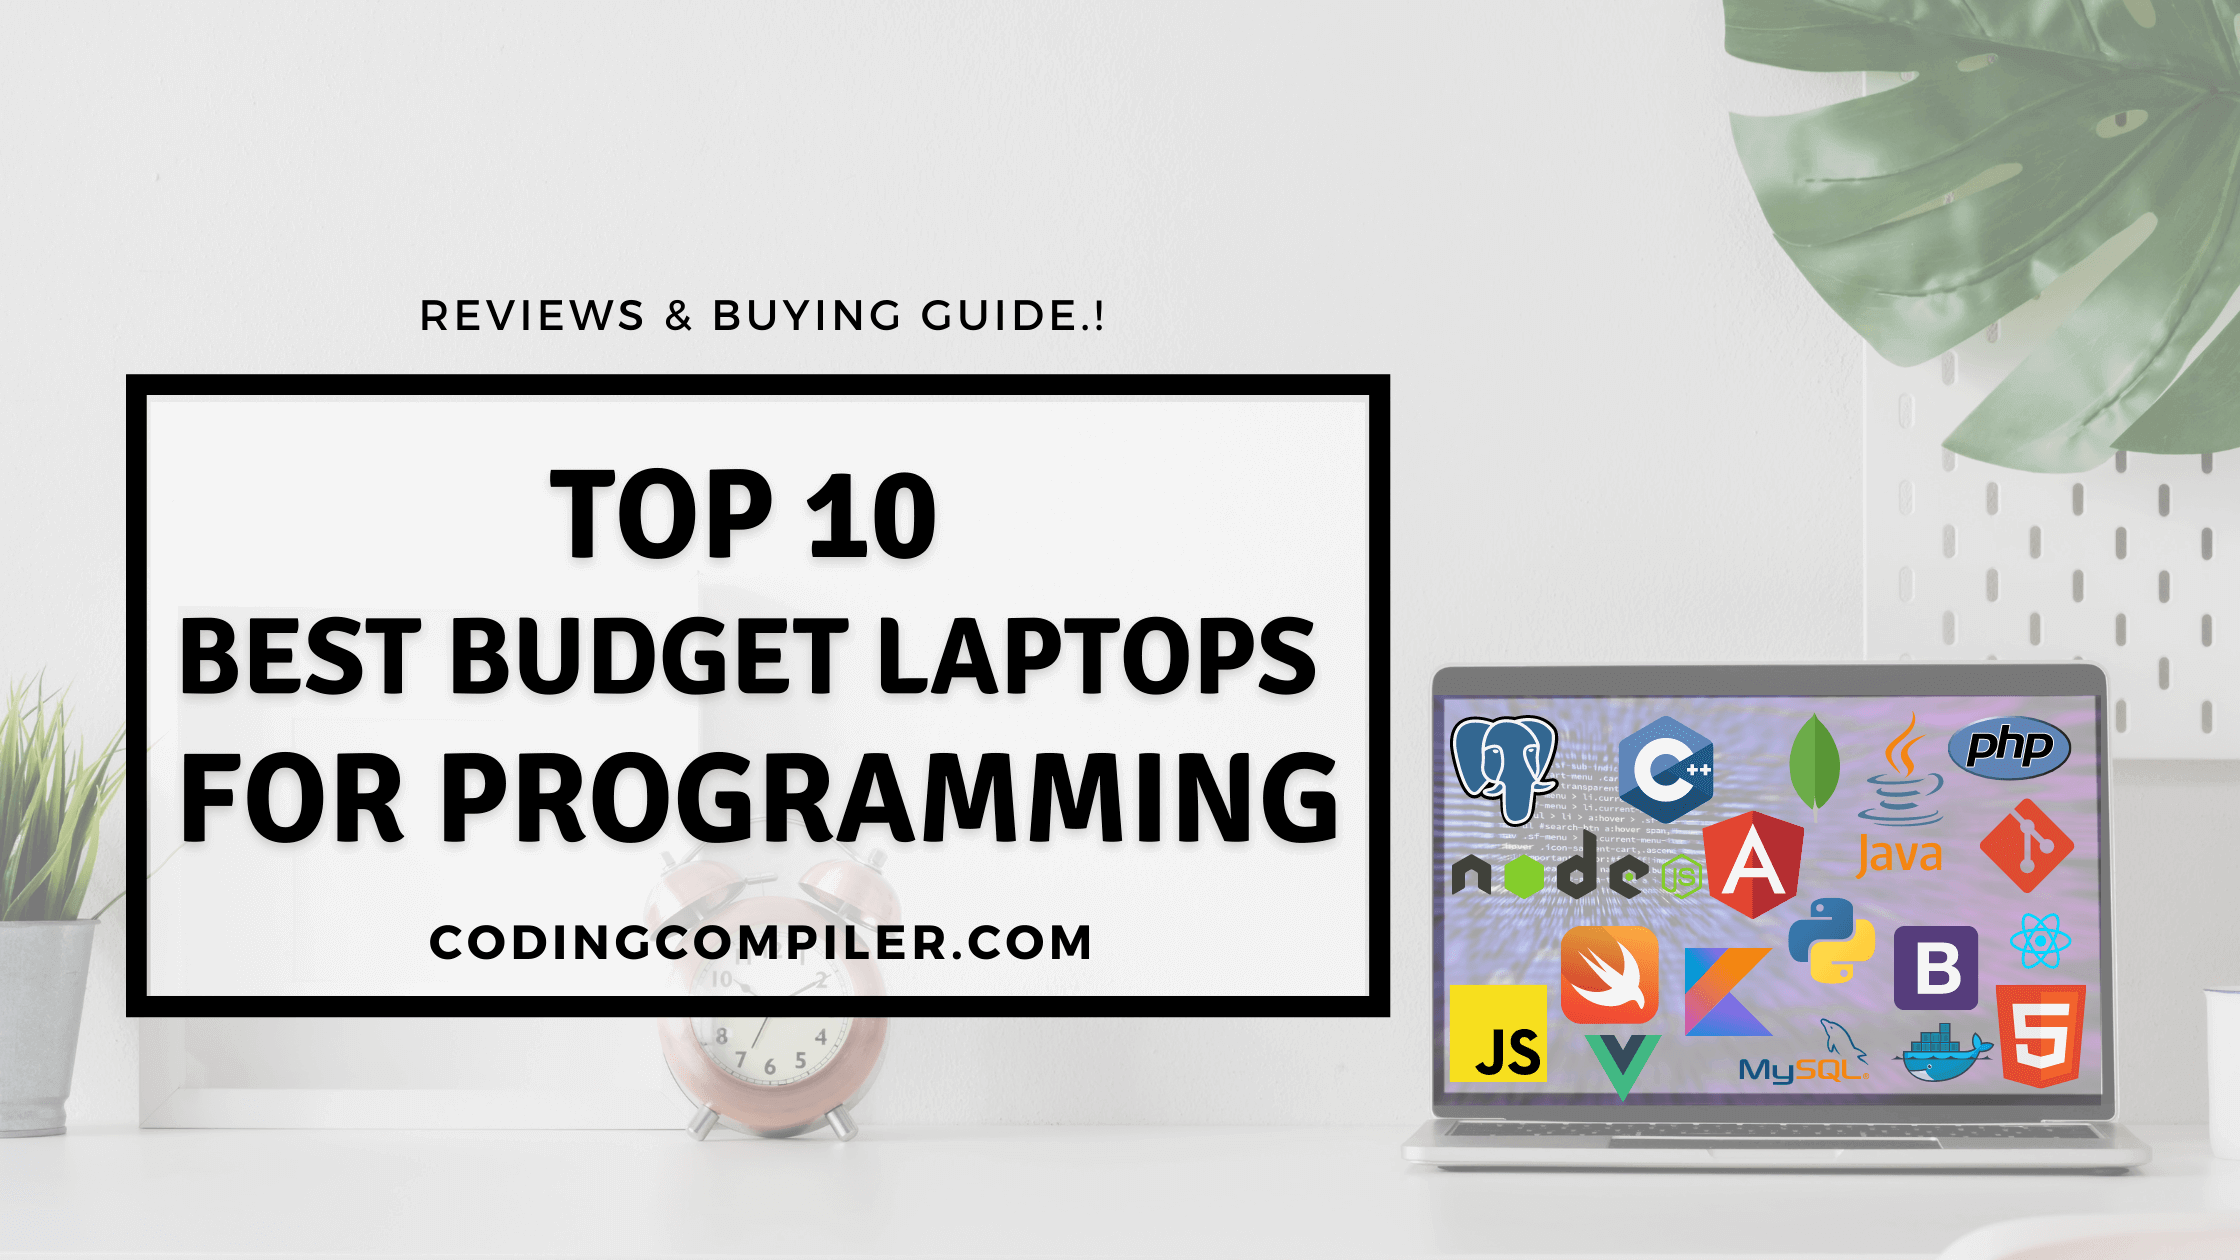 Top 10 Best Budget Laptops For Programming